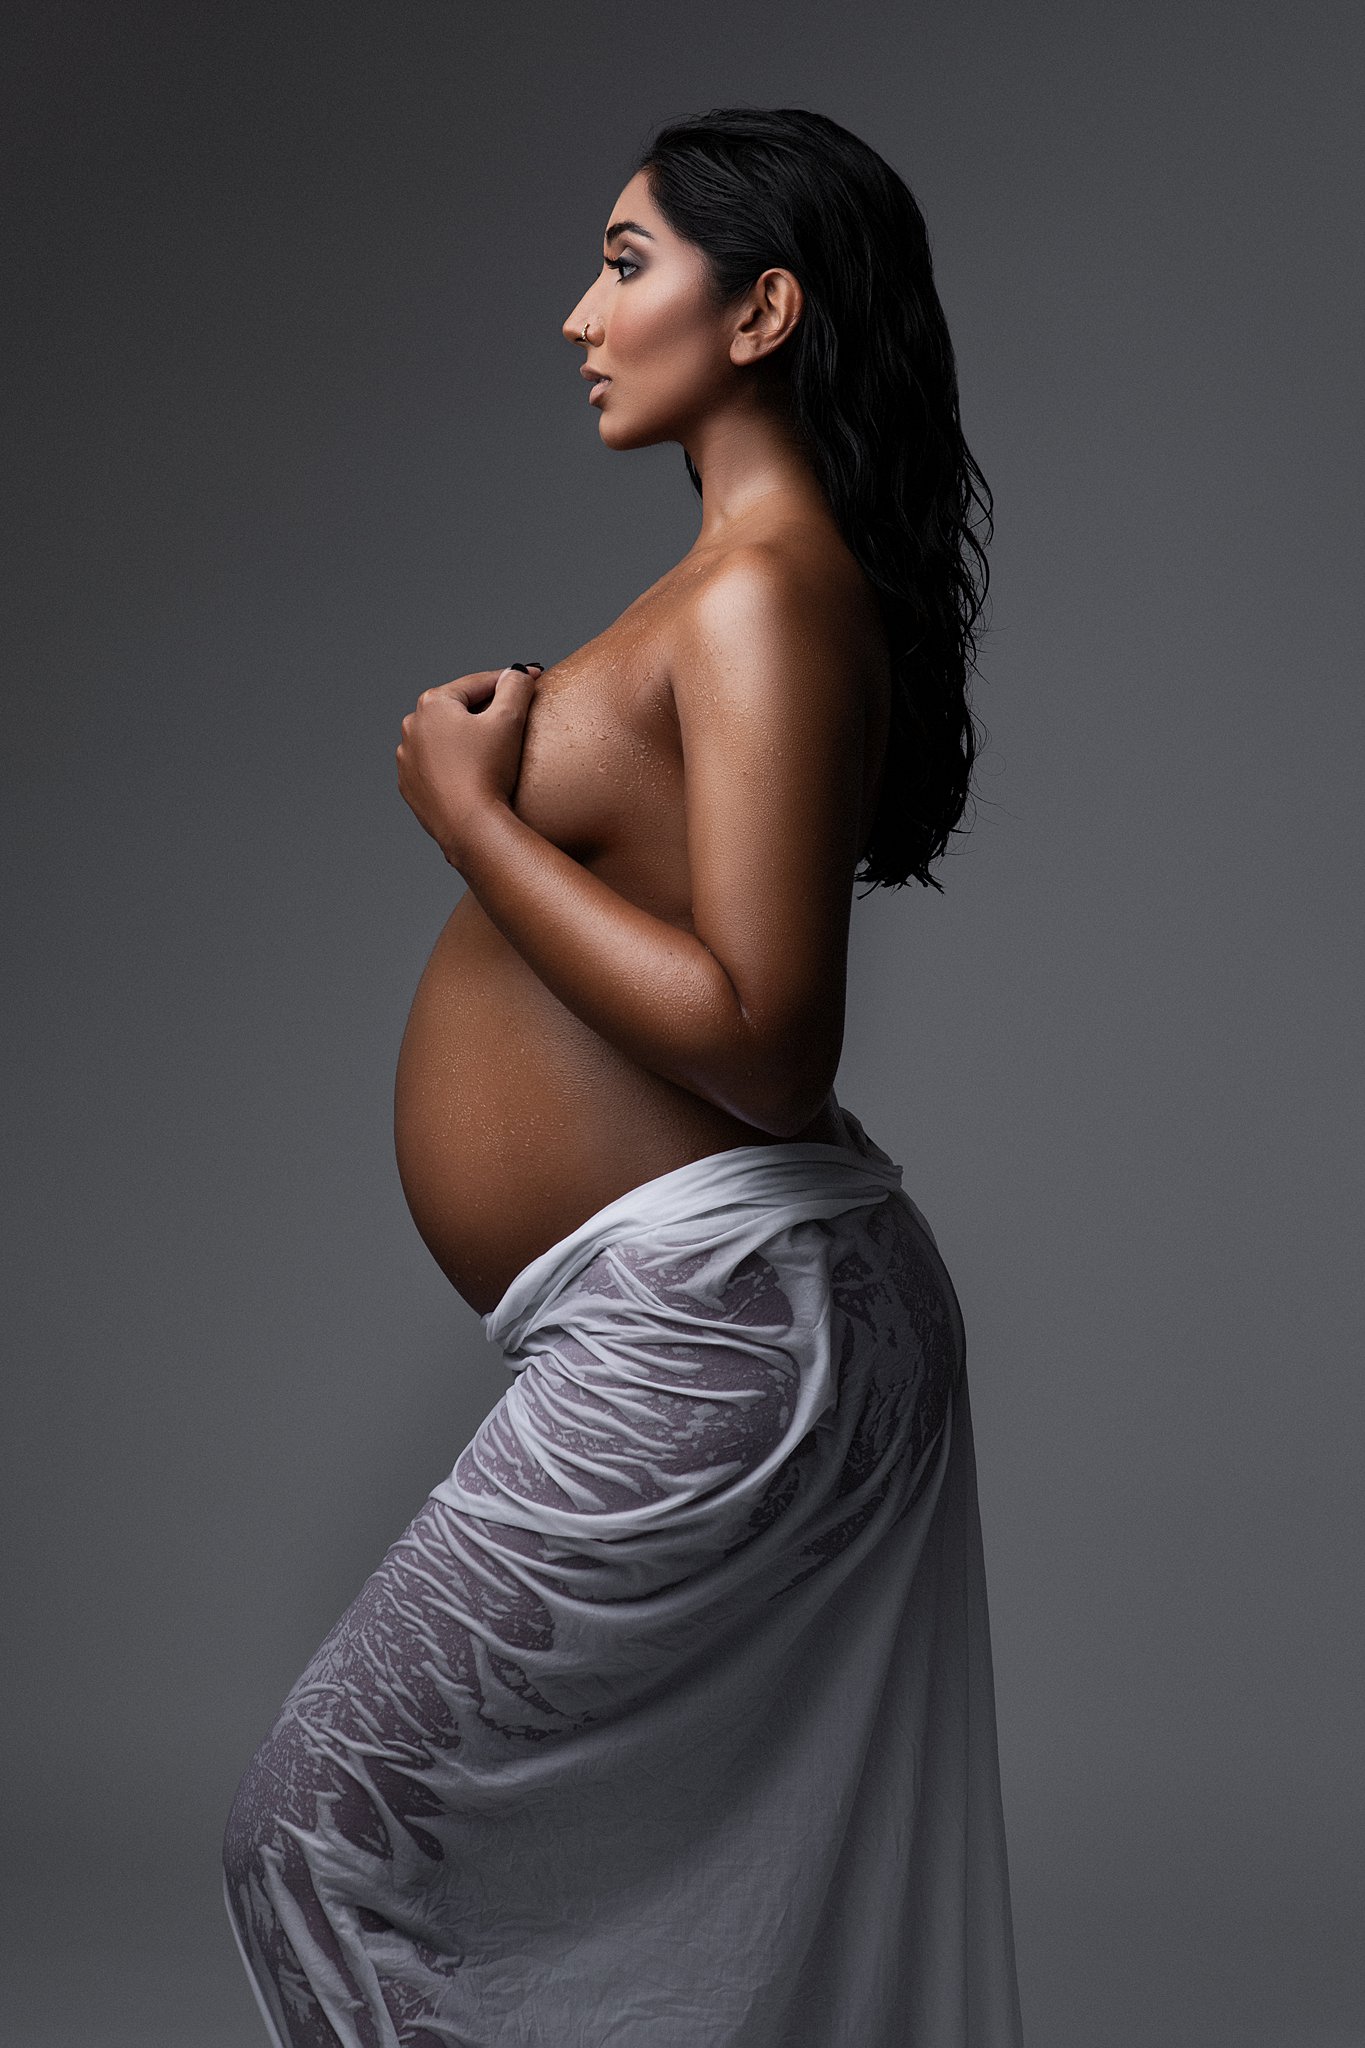 A pregnant woman stands in a studio wearing a wet fabric around her birthing center south florida